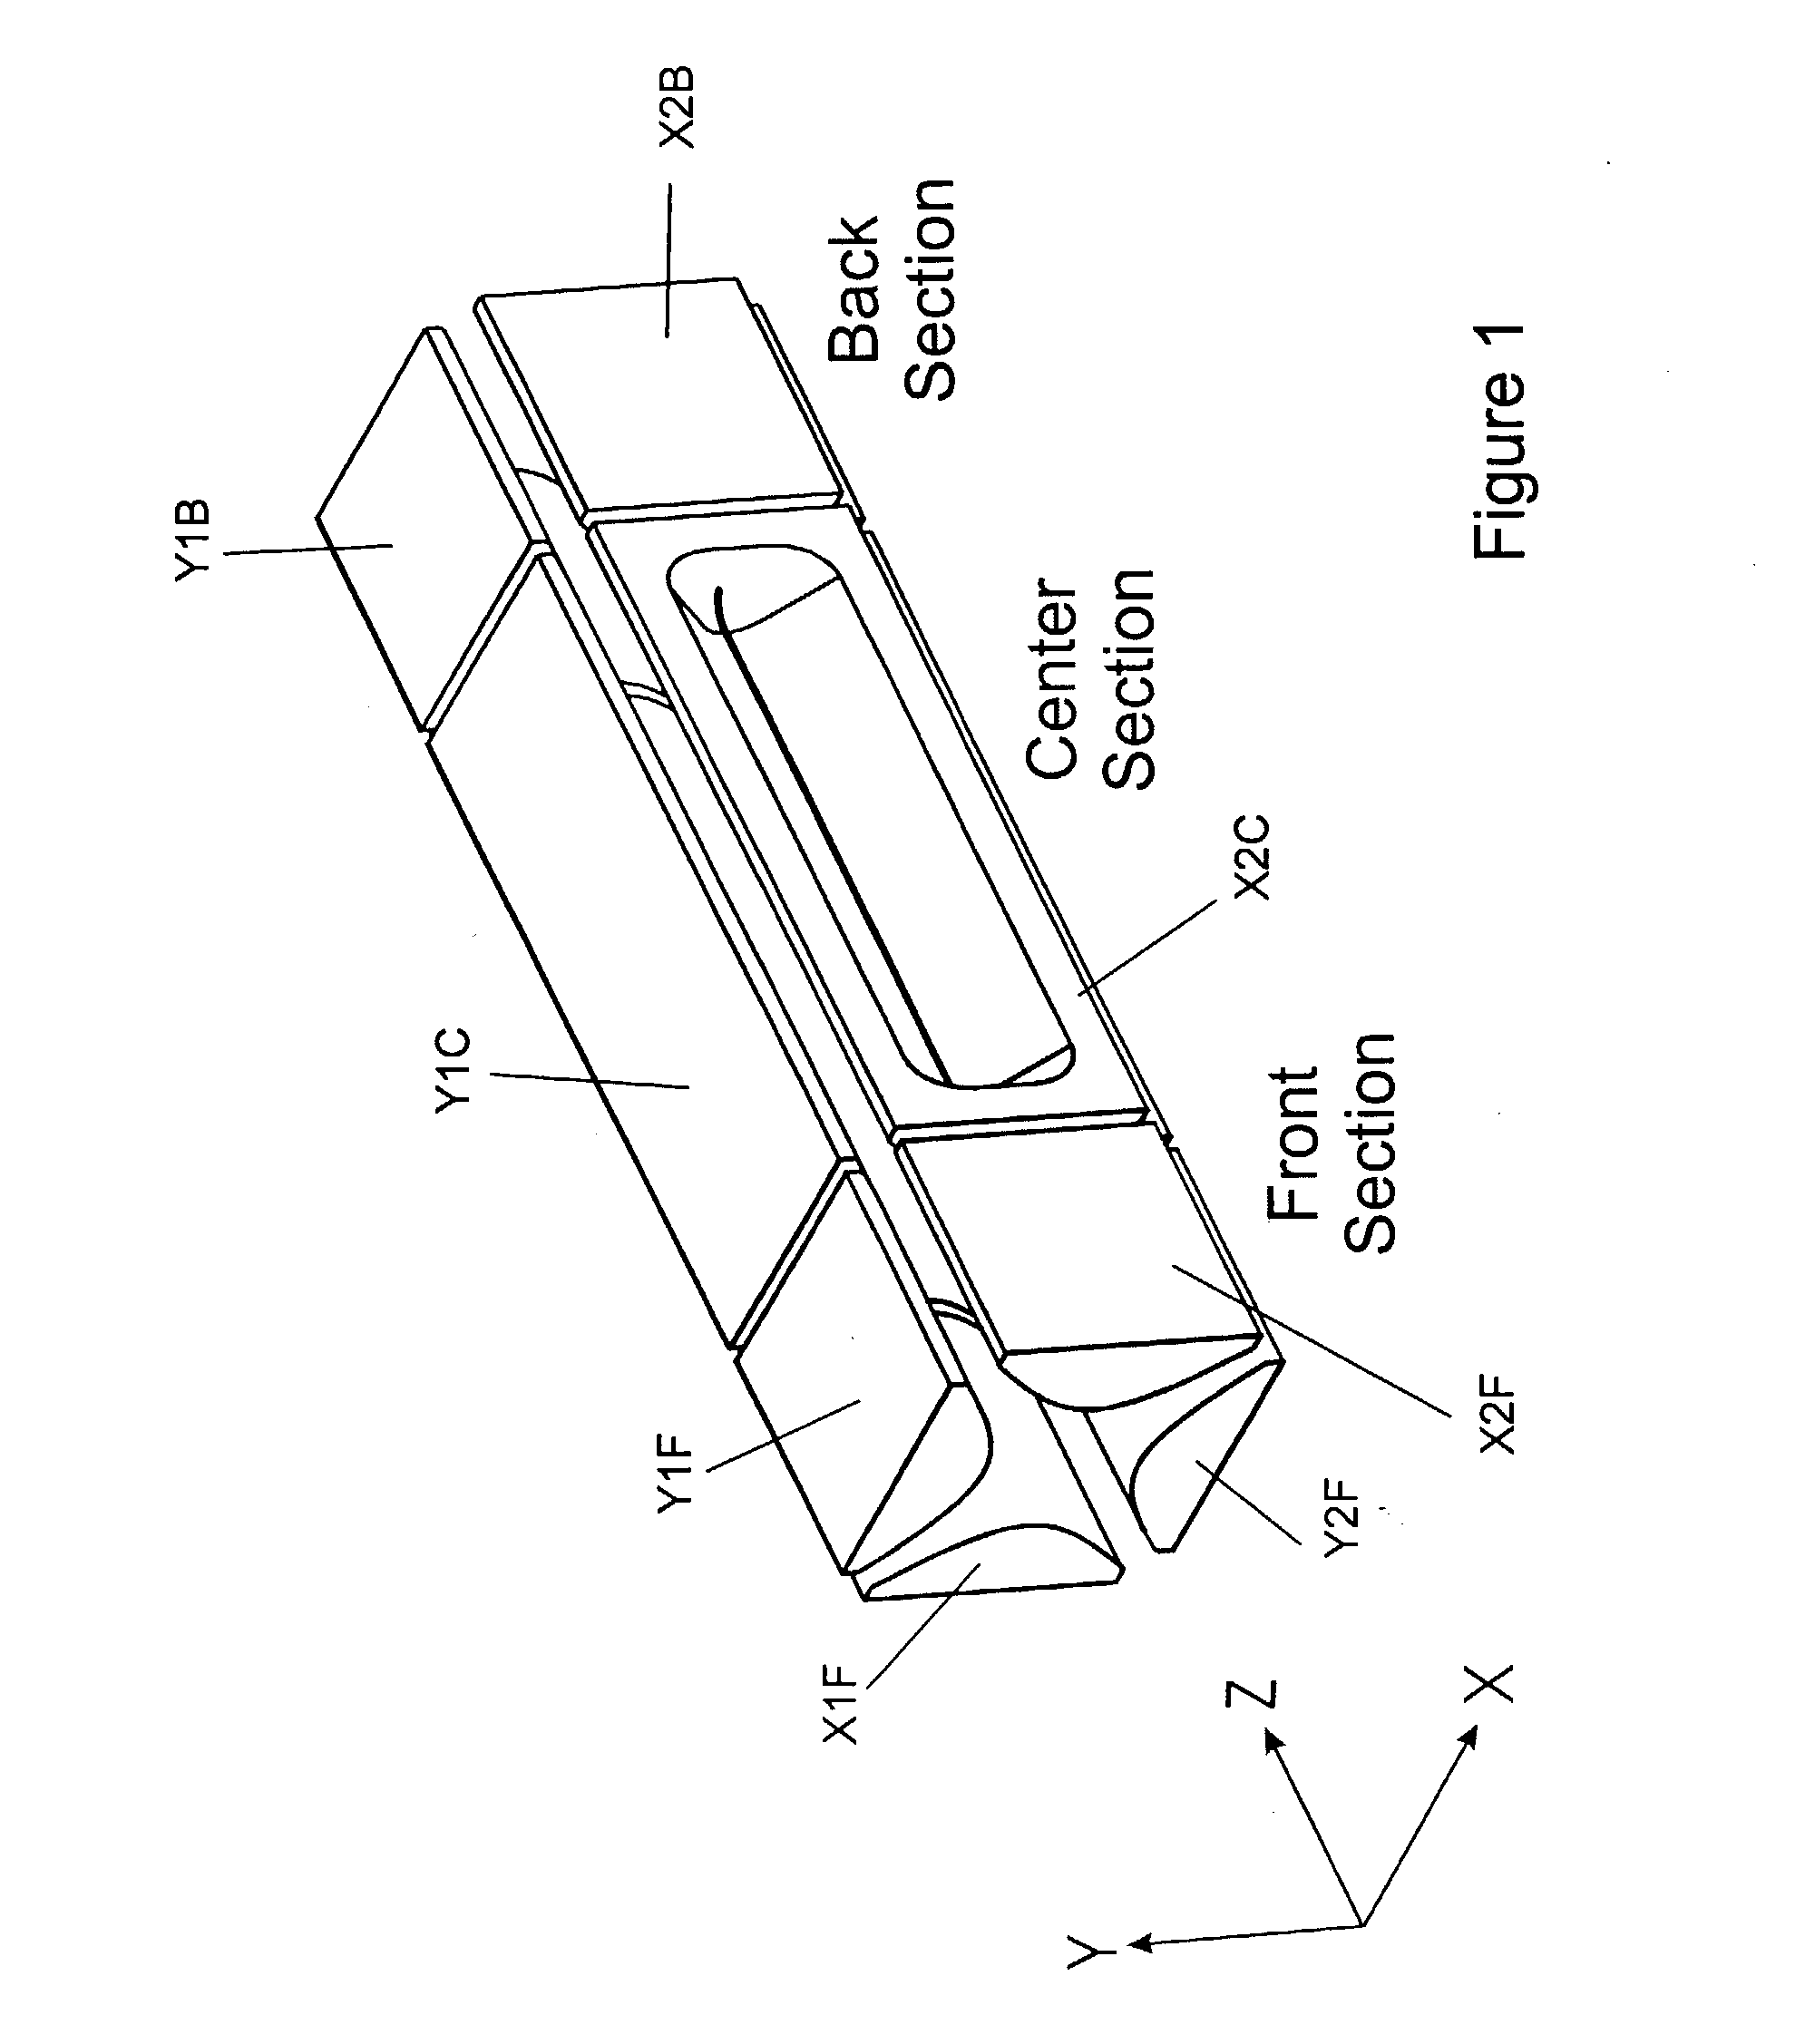 Circuit for applying suplementary voltages to RF multipole devices